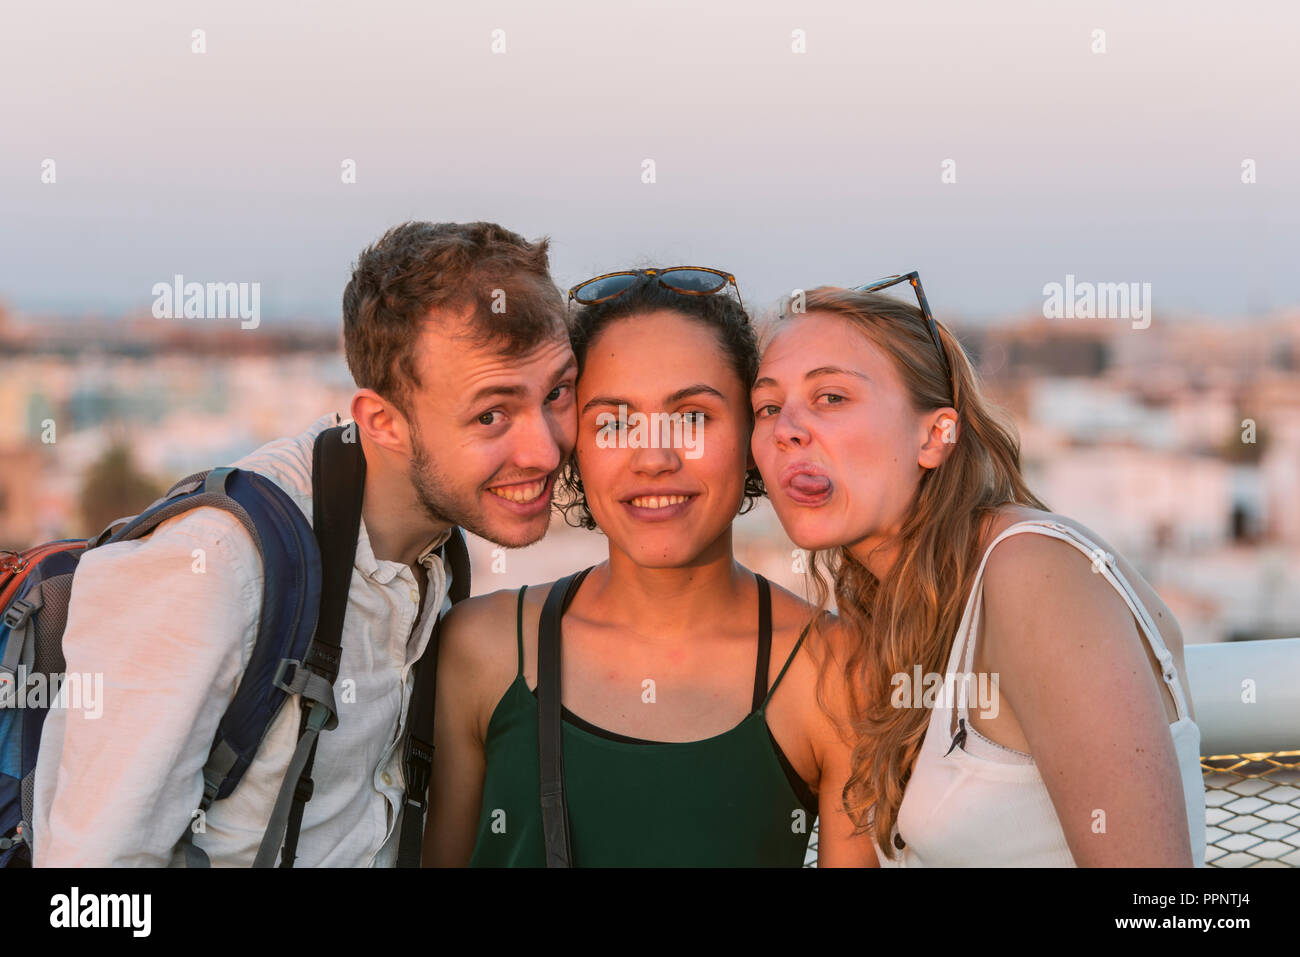 Two young women and young man look into the camera, make faces, friends, Plaza de la Encarnacion, Sevilla, Andalusia, Spain Stock Photo